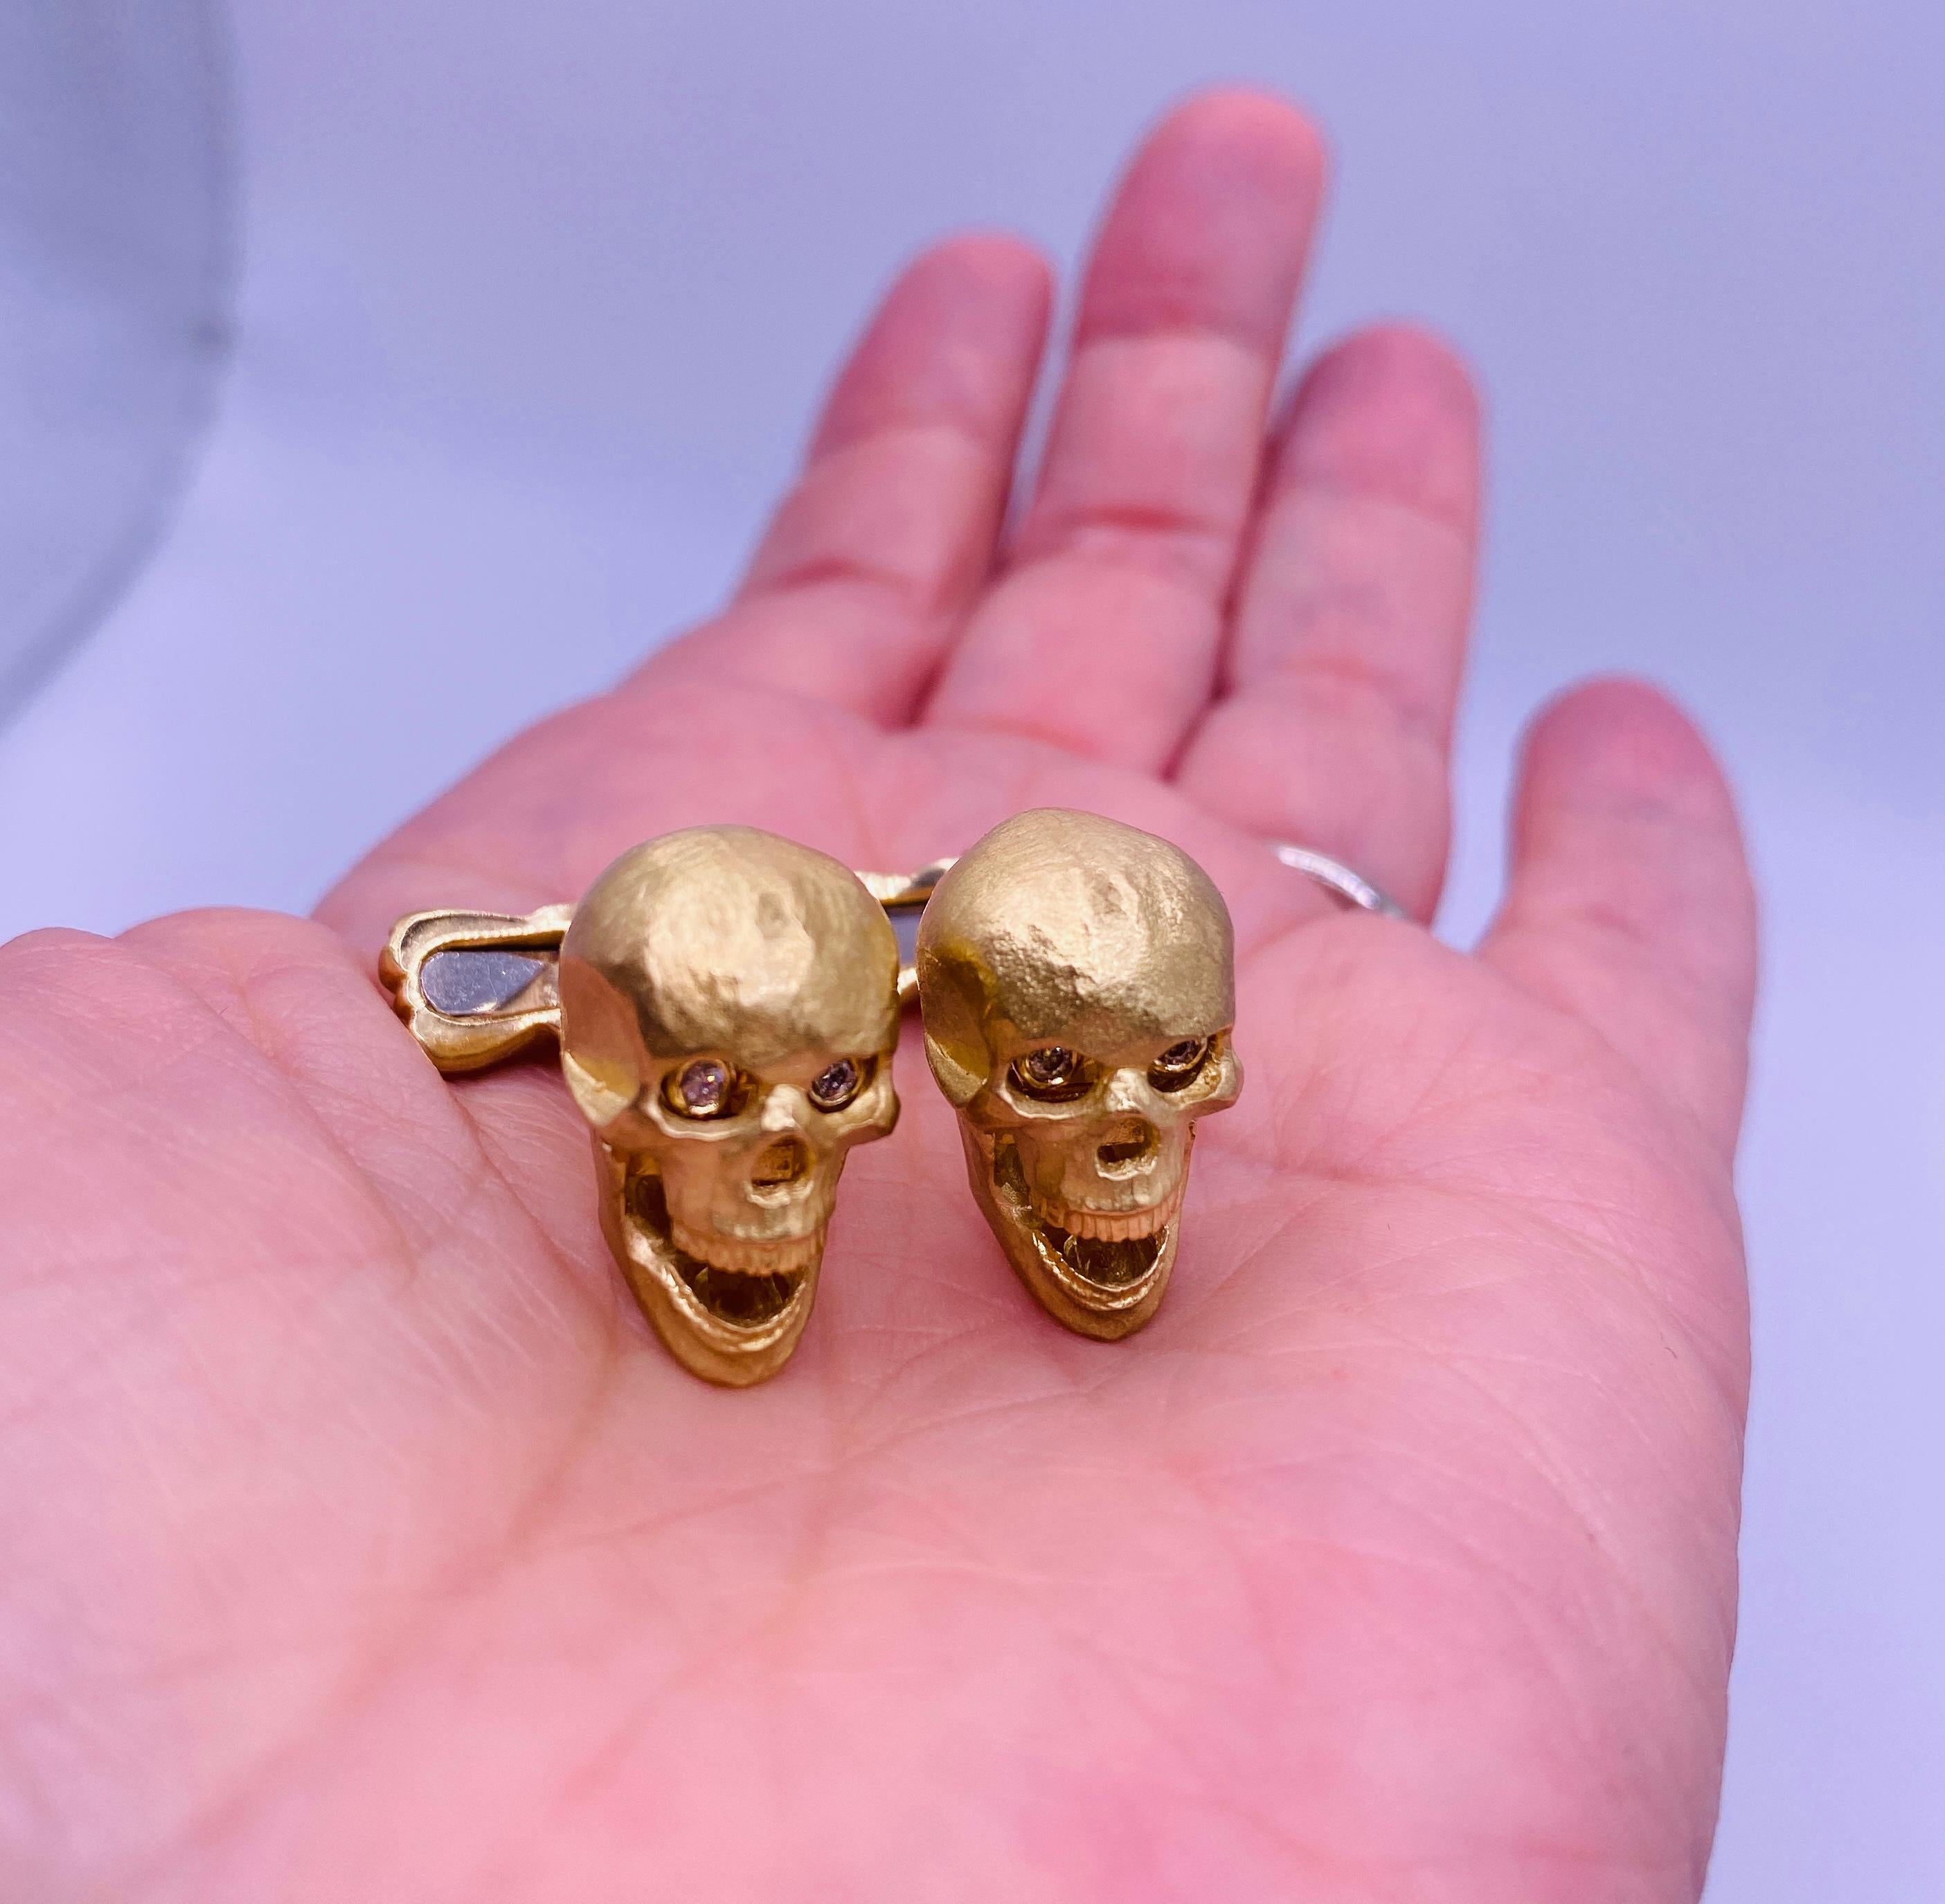 Deakin & Francis 18k yellow gold 0.12 carat total weight diamond skull cuff links with popping diamond eyes. 18.1Dwt MSRP $11,505